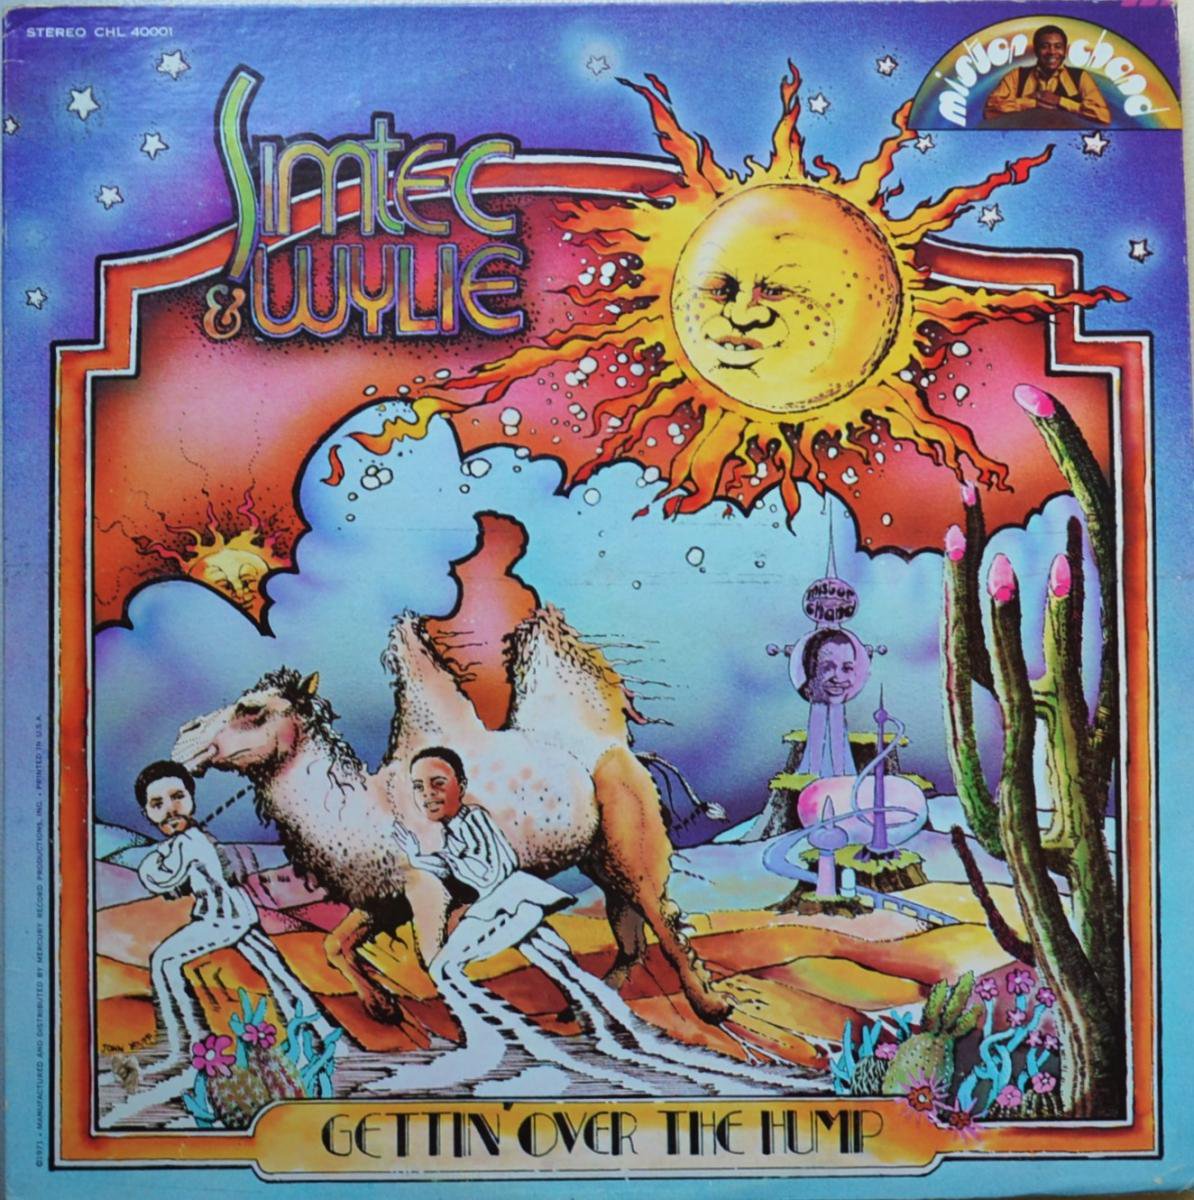 SIMTEC & WYLIE / GETTIN' OVER THE HUMP (LP)